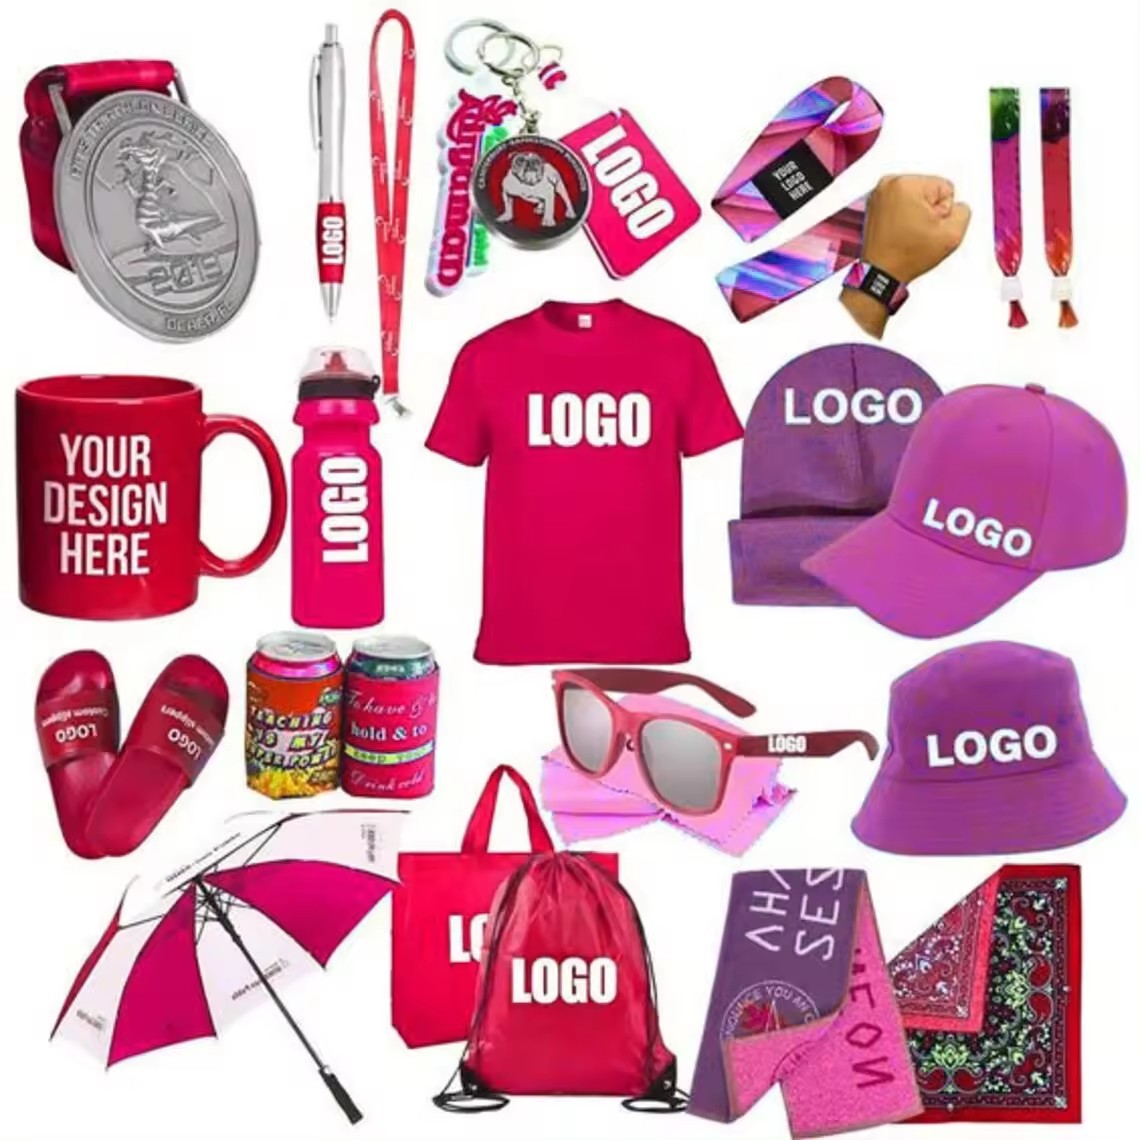 Business Gifts With Logo Office Gift Set Item Advertising Promotional Gift Items Sets For Marketing